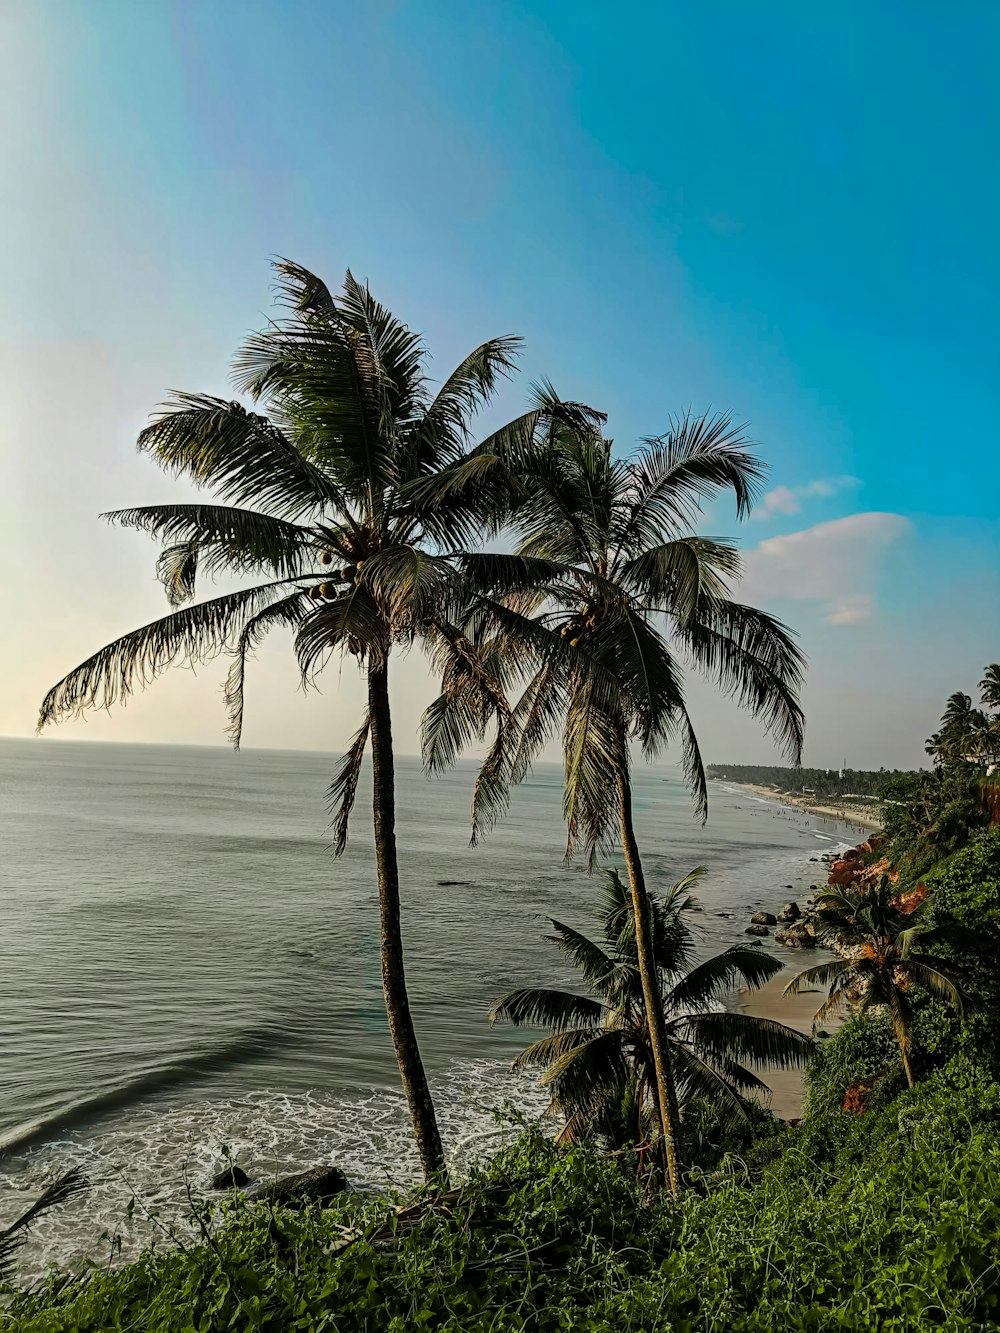 a view of a beach with palm trees and the ocean